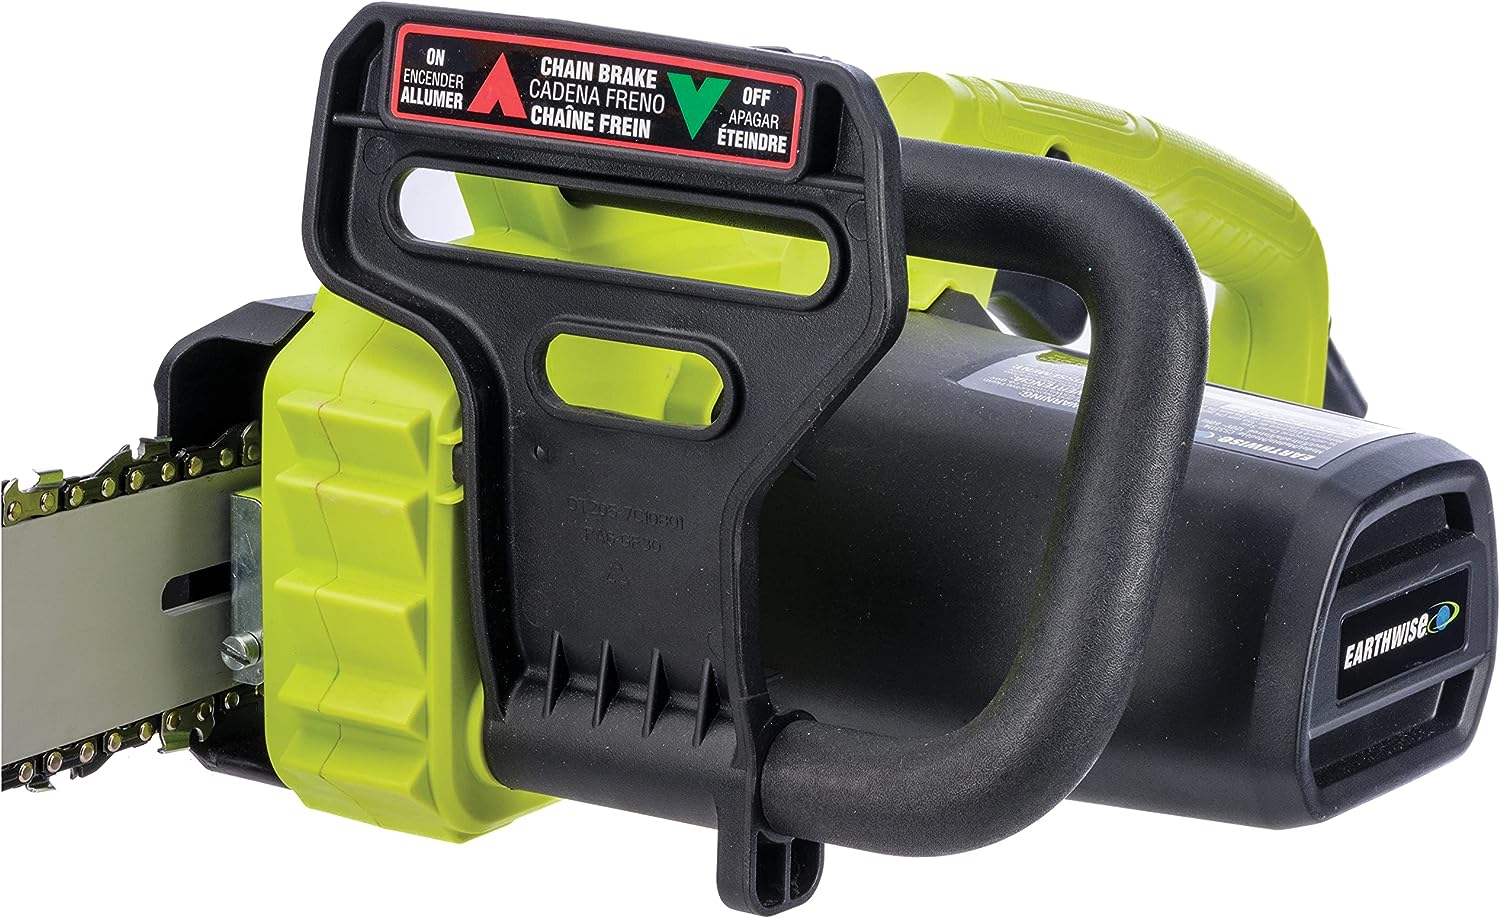 Earthwise CS33114 14 in. 9-Amp Corded Electric Chainsaw